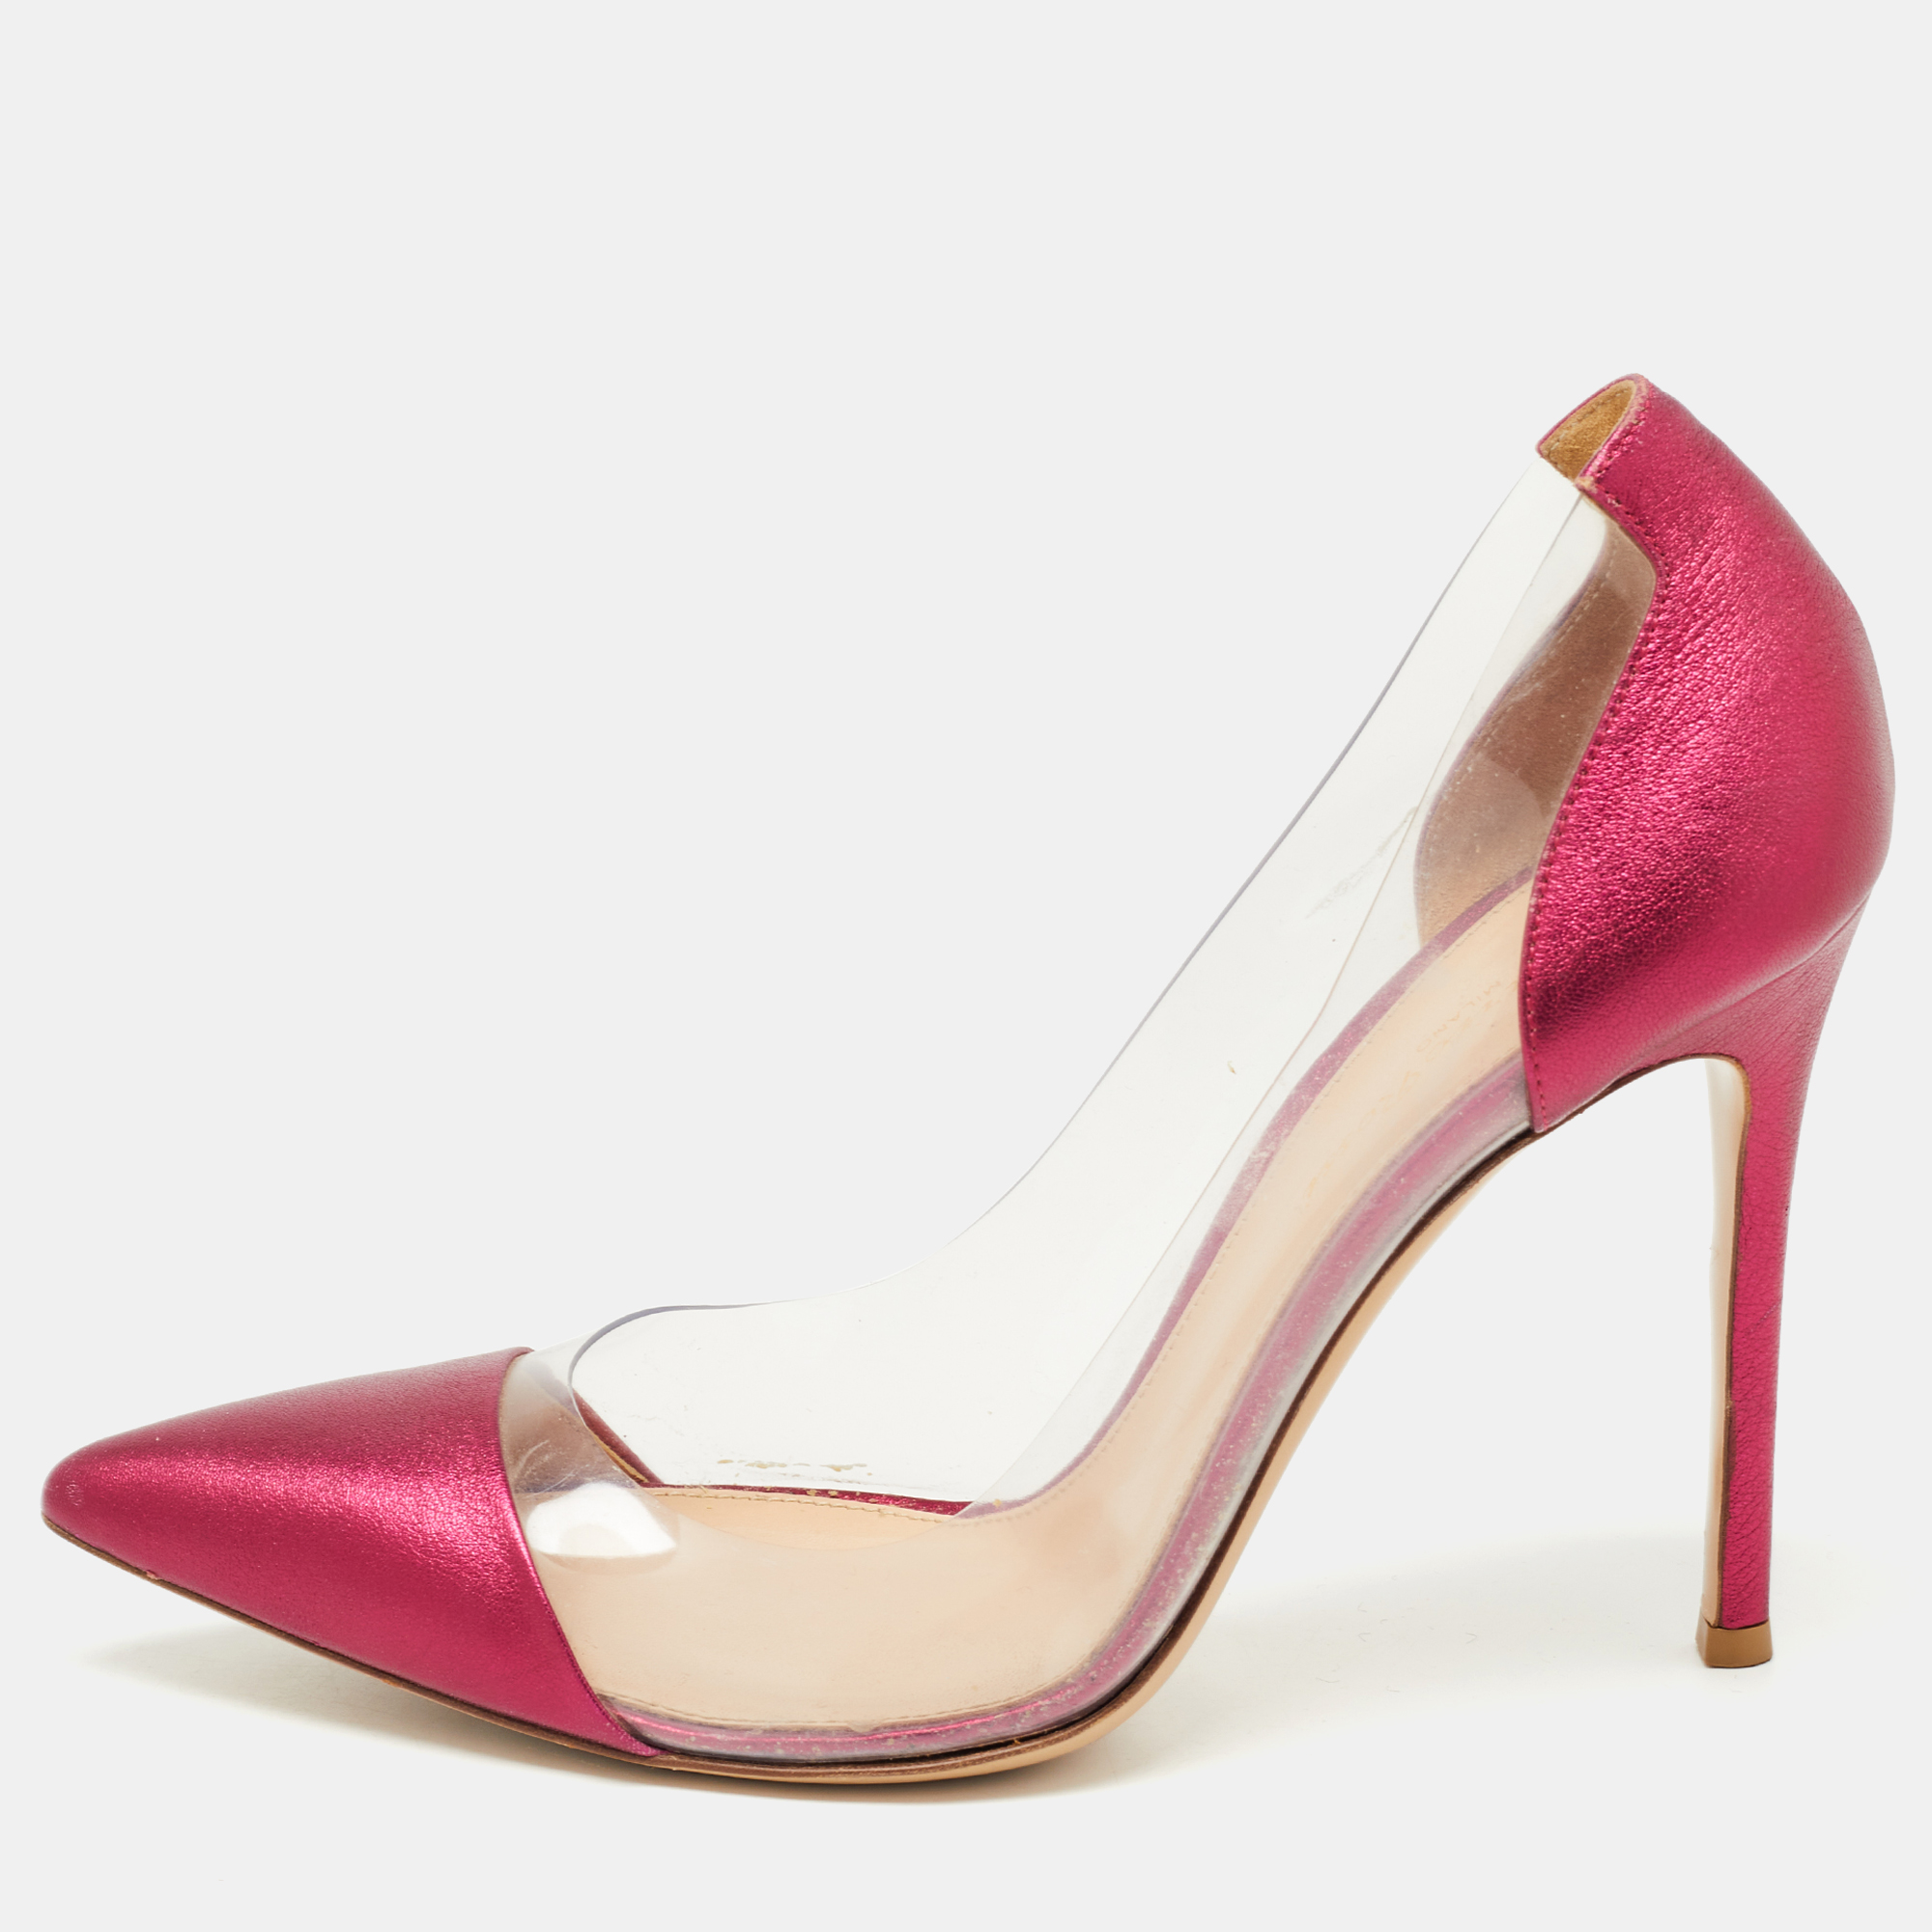 Gianvito rossi metallic pink leather and pvc plexi pumps size 38